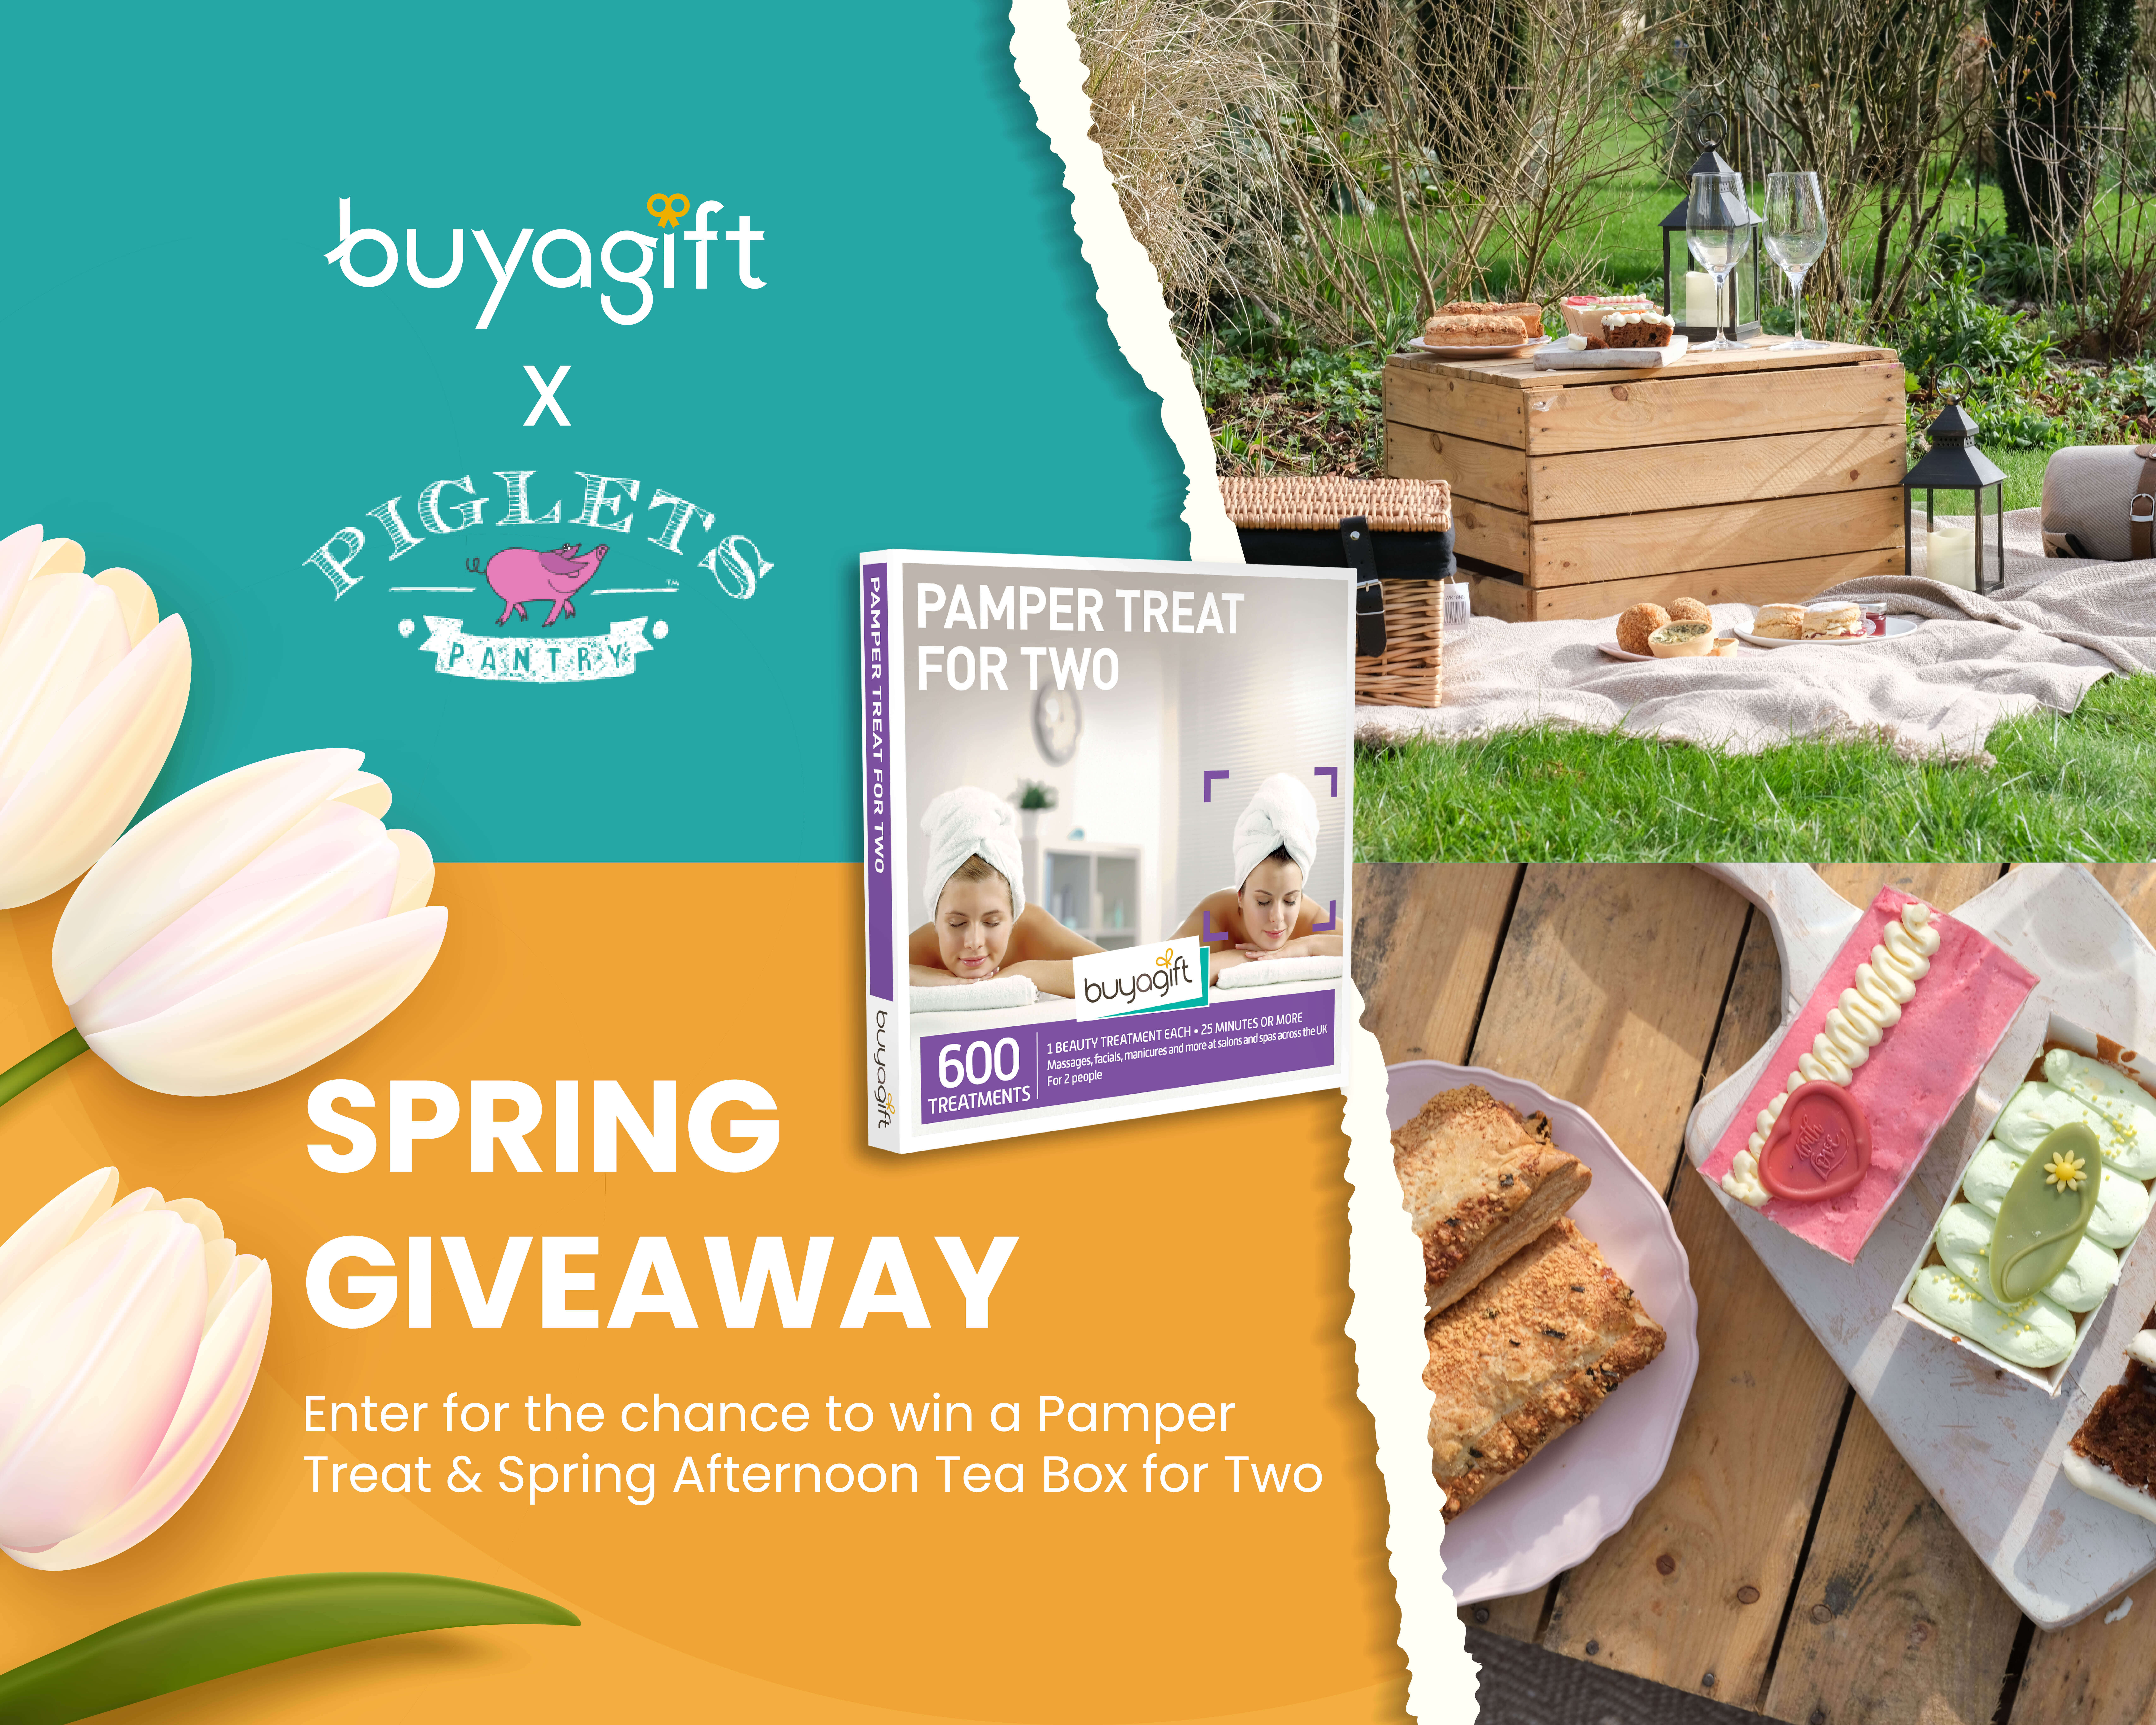 Spring giveaway - enter our Competition to be in with a chance to win a Pamper Treat and Spring Afternoon Tea Box for Two